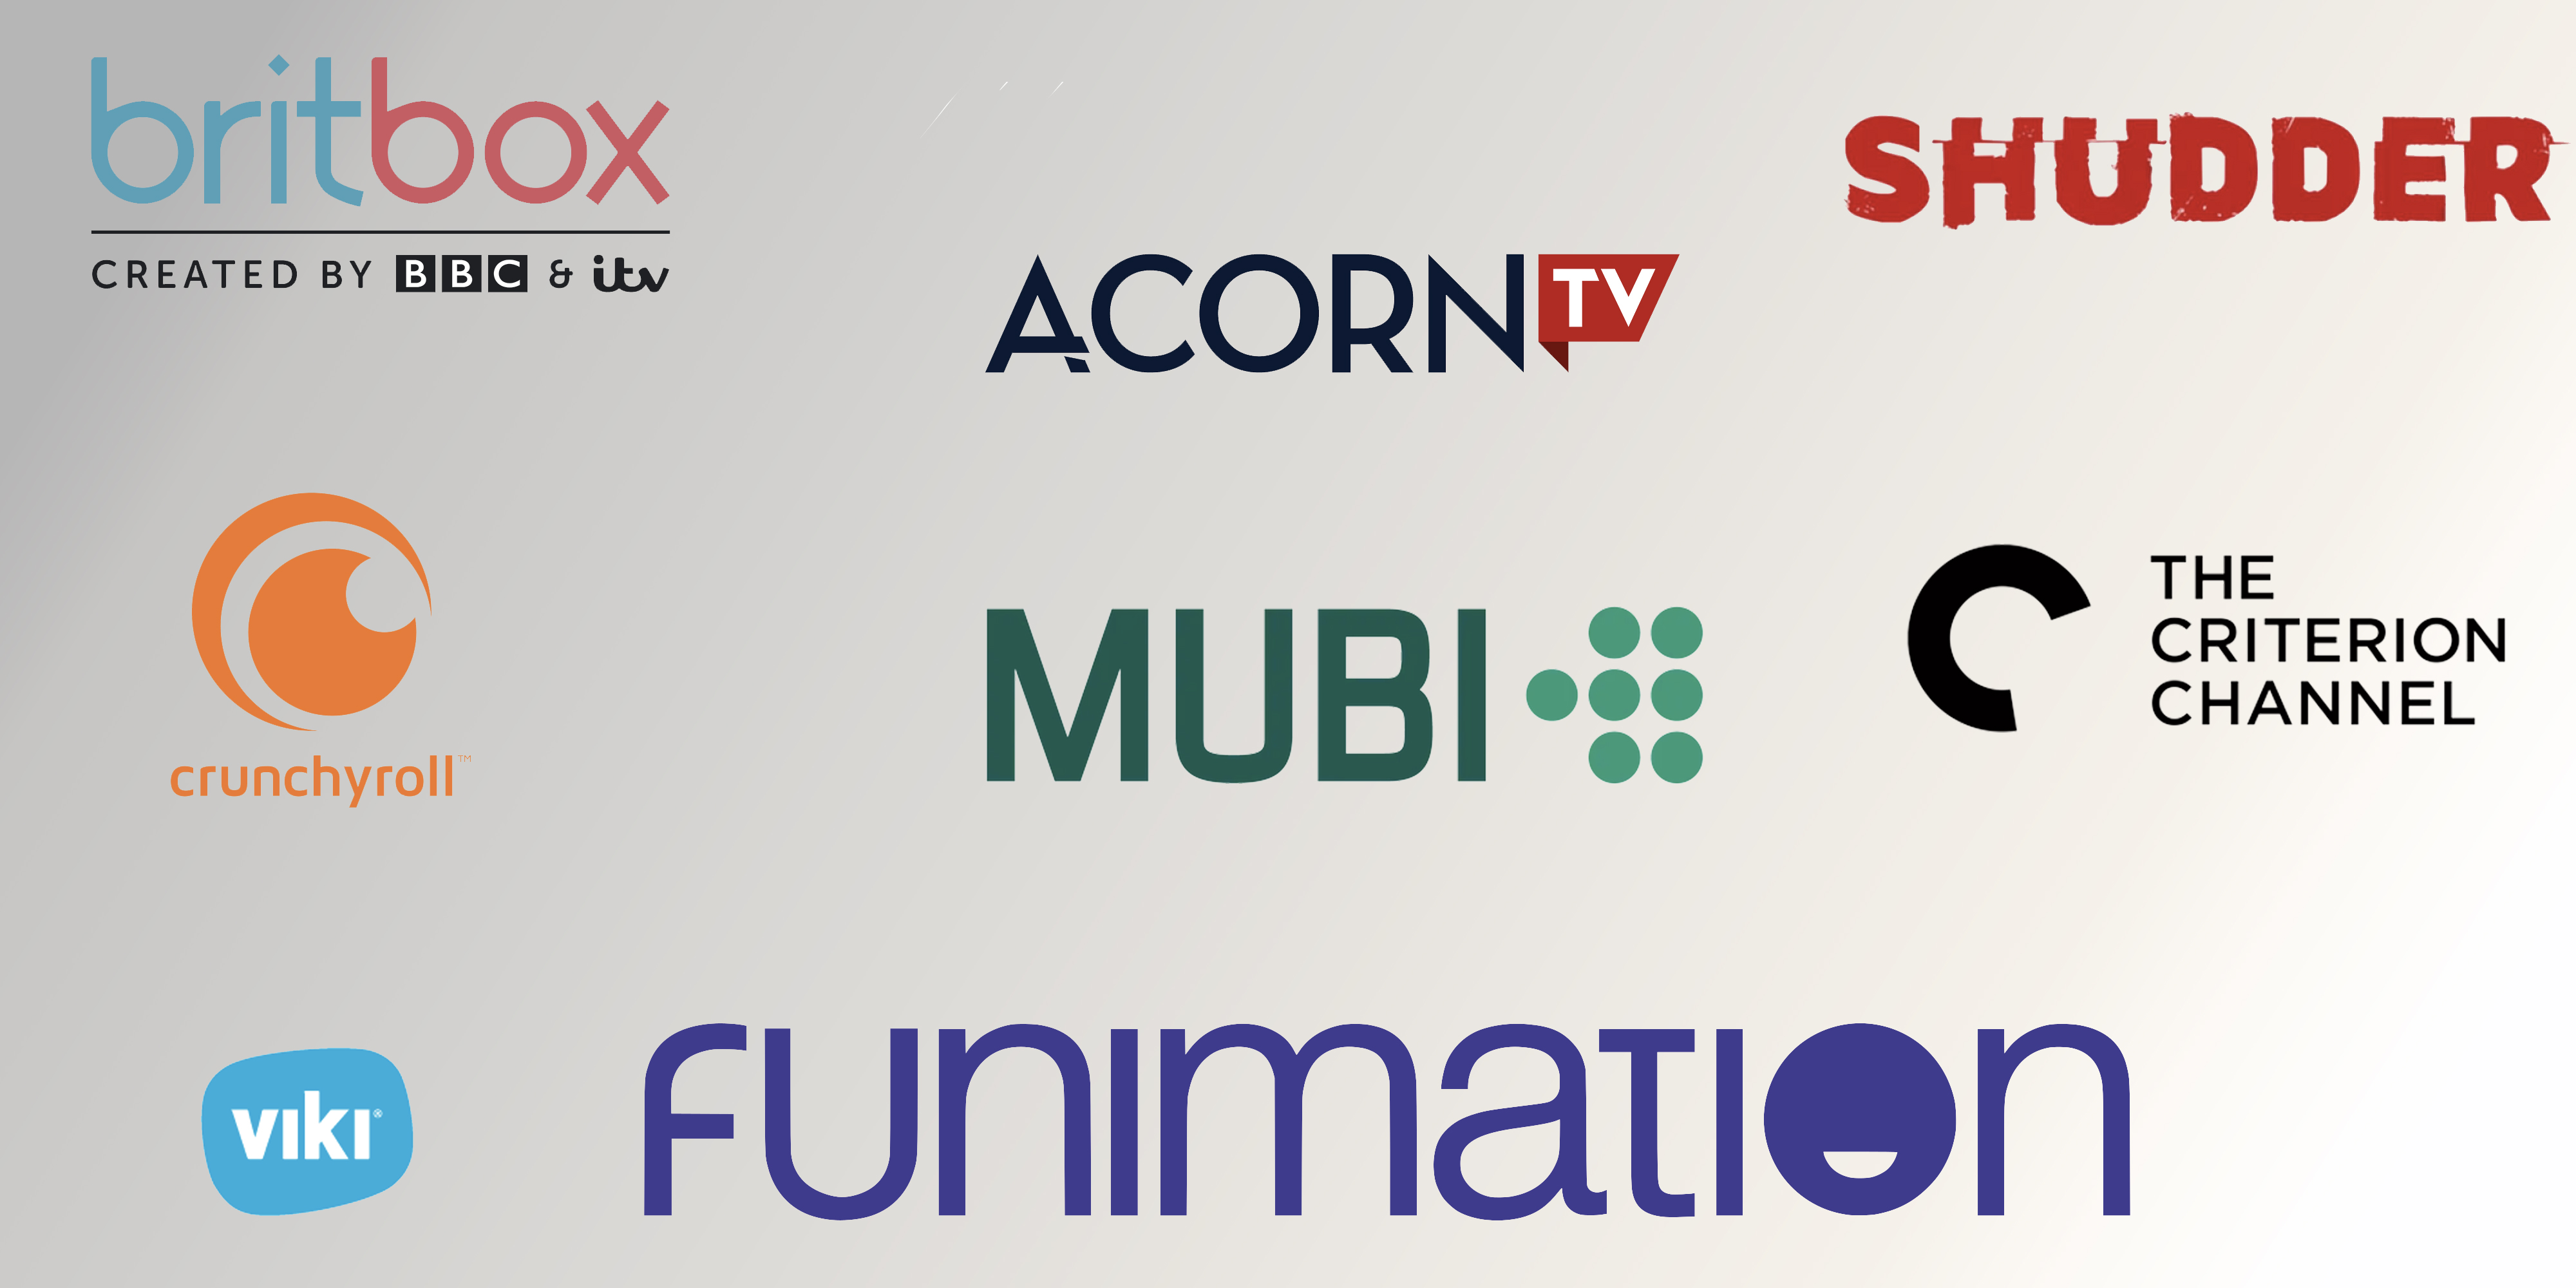 A collection of niche streaming platform logos